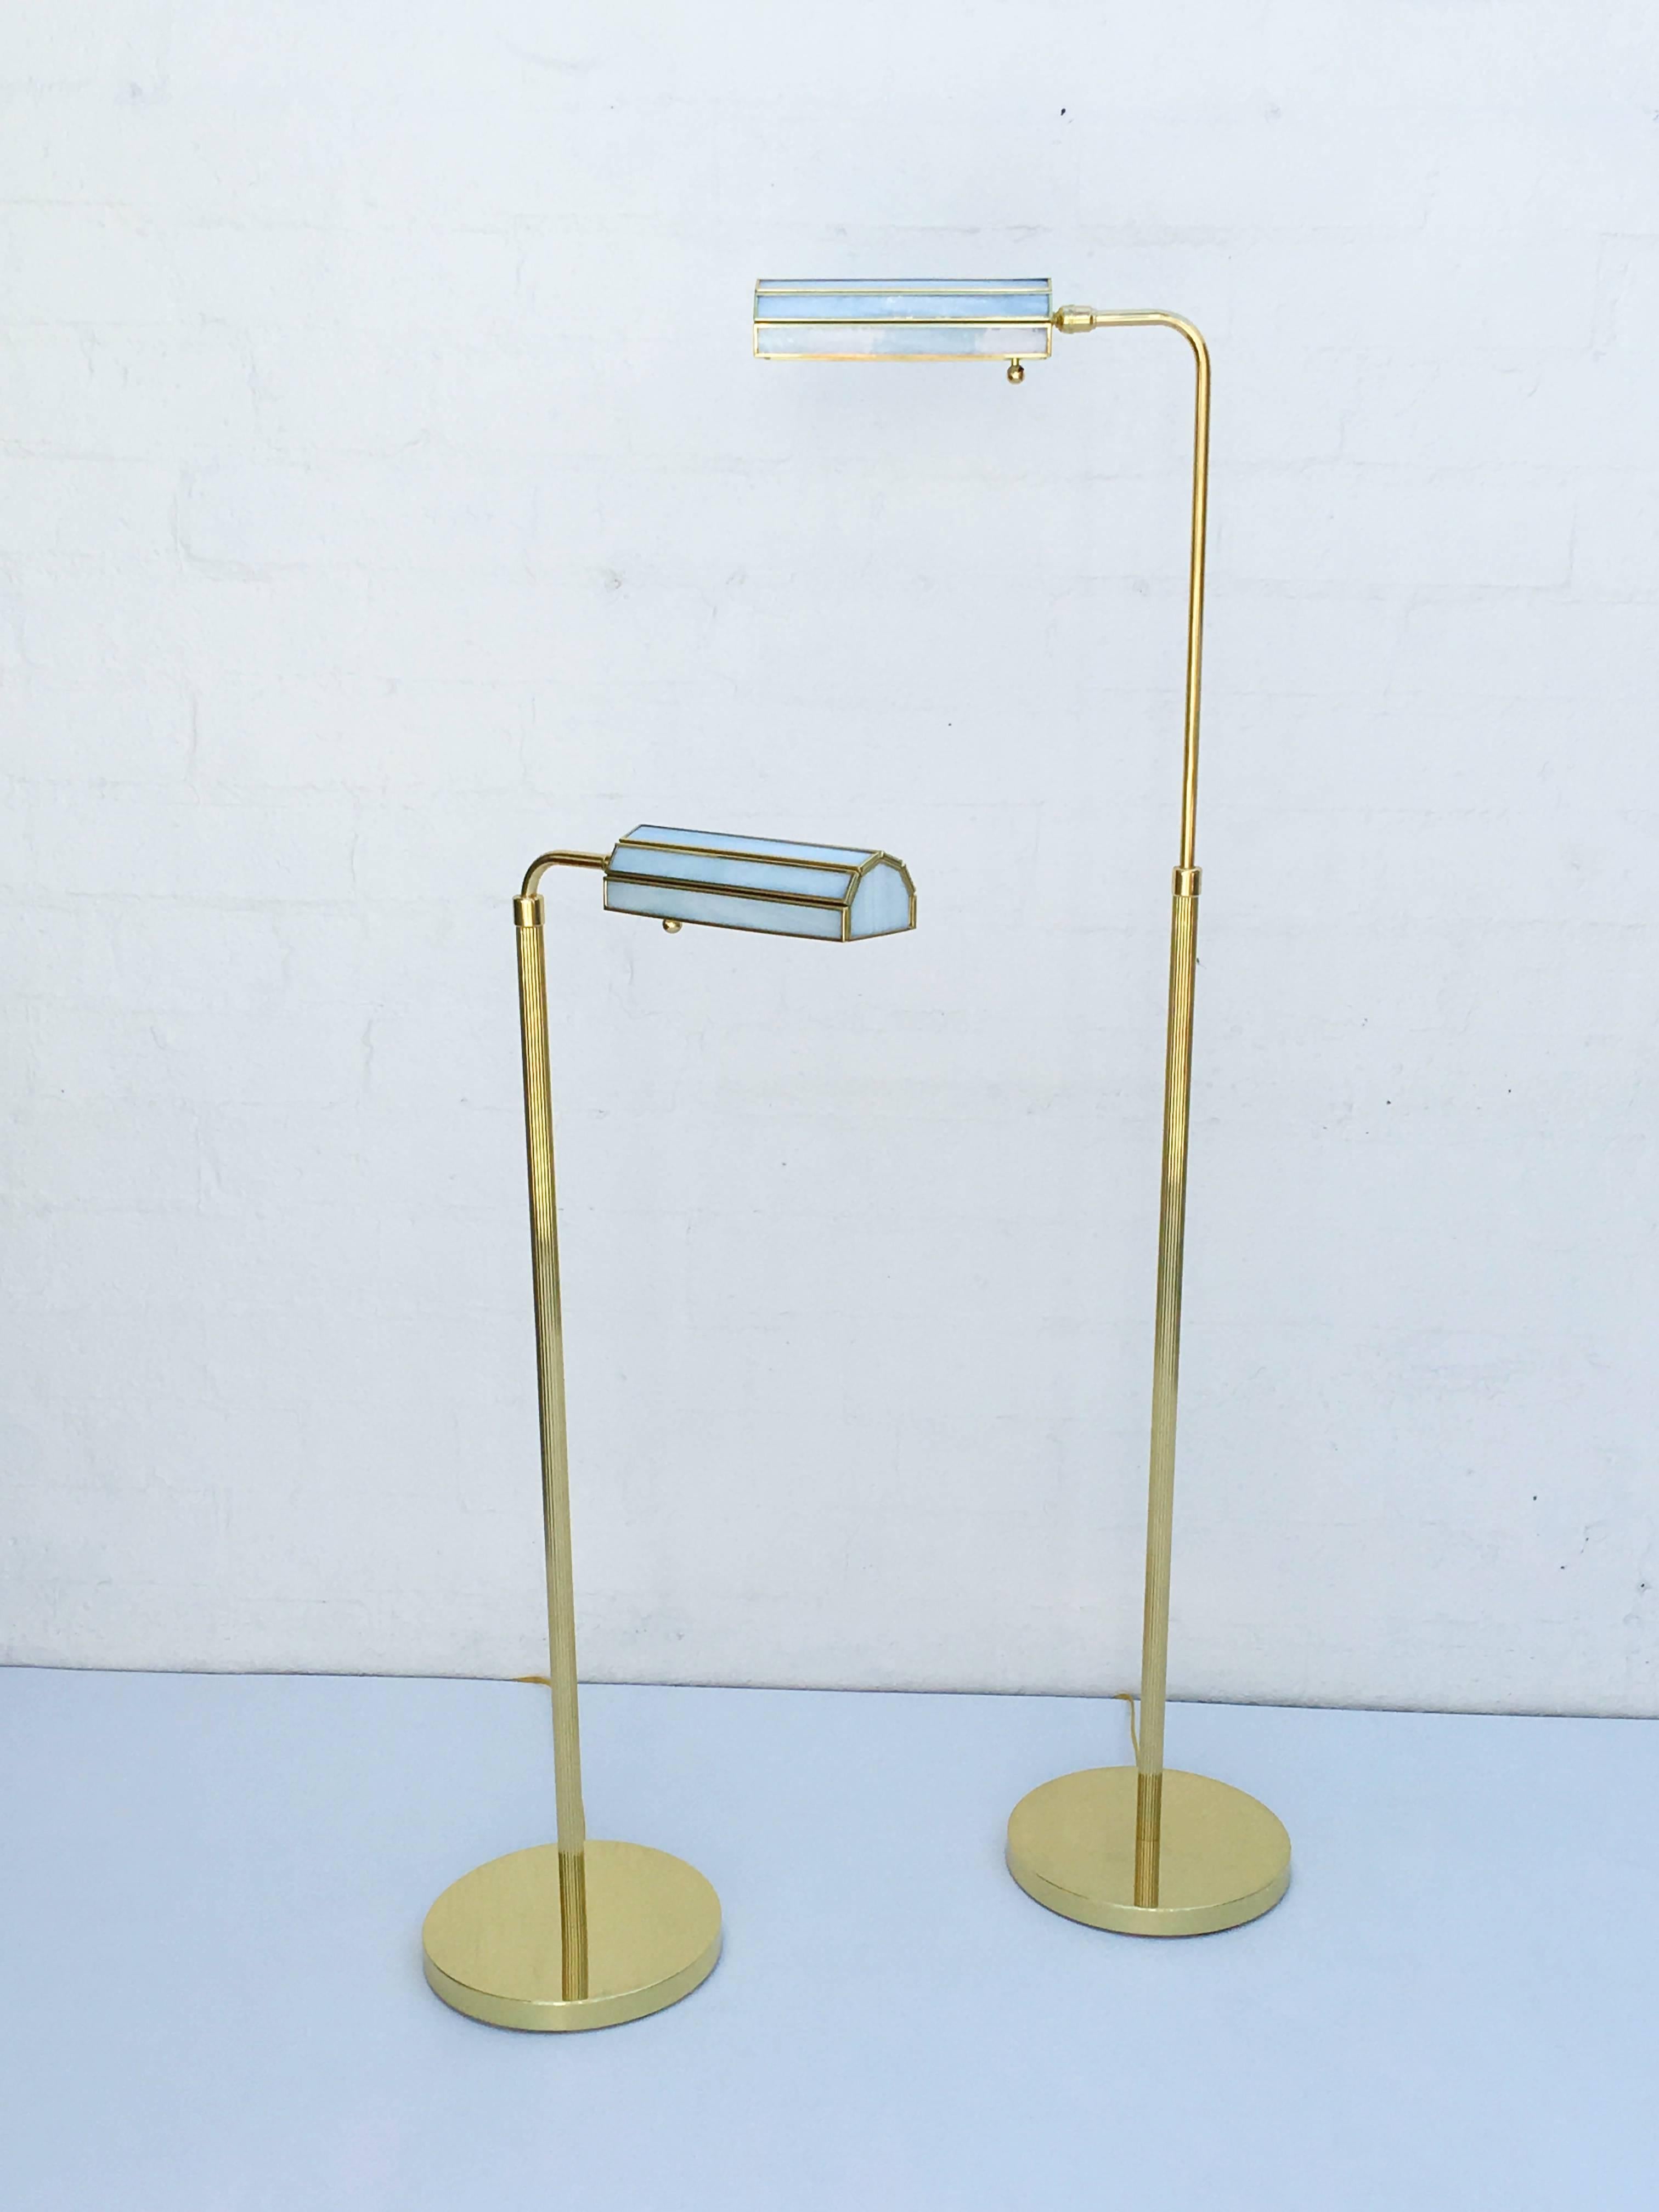 A pair of glamorous 1970s polished brass floor lamps with custom white stained glass shades. Newly professionally polished and rewired.
With full range electronic dimmer.
Dim: 58